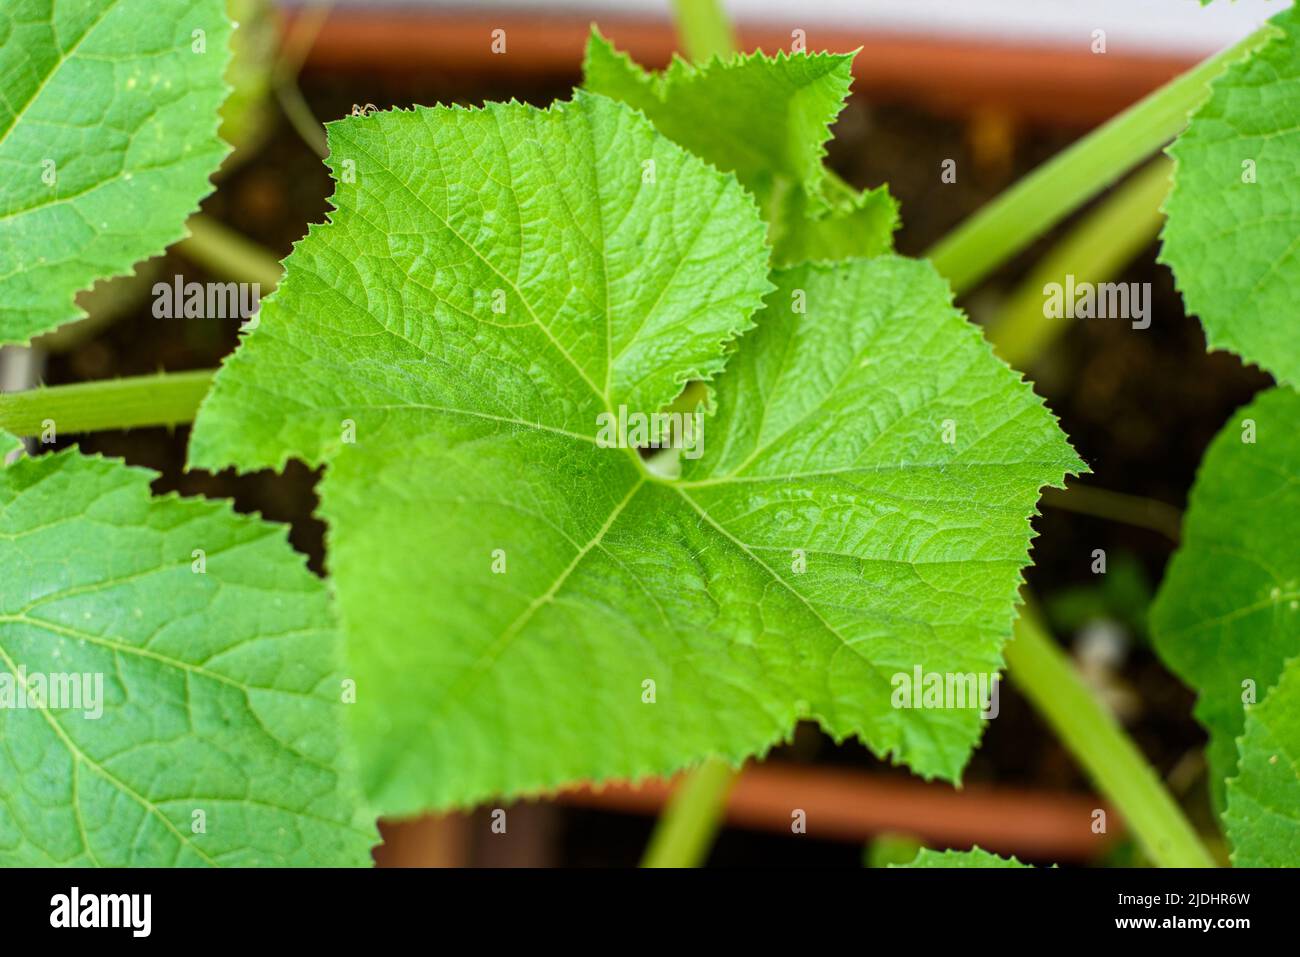 Detail of the leaves of a pumpkin plant, growing in a pot. Stock Photo